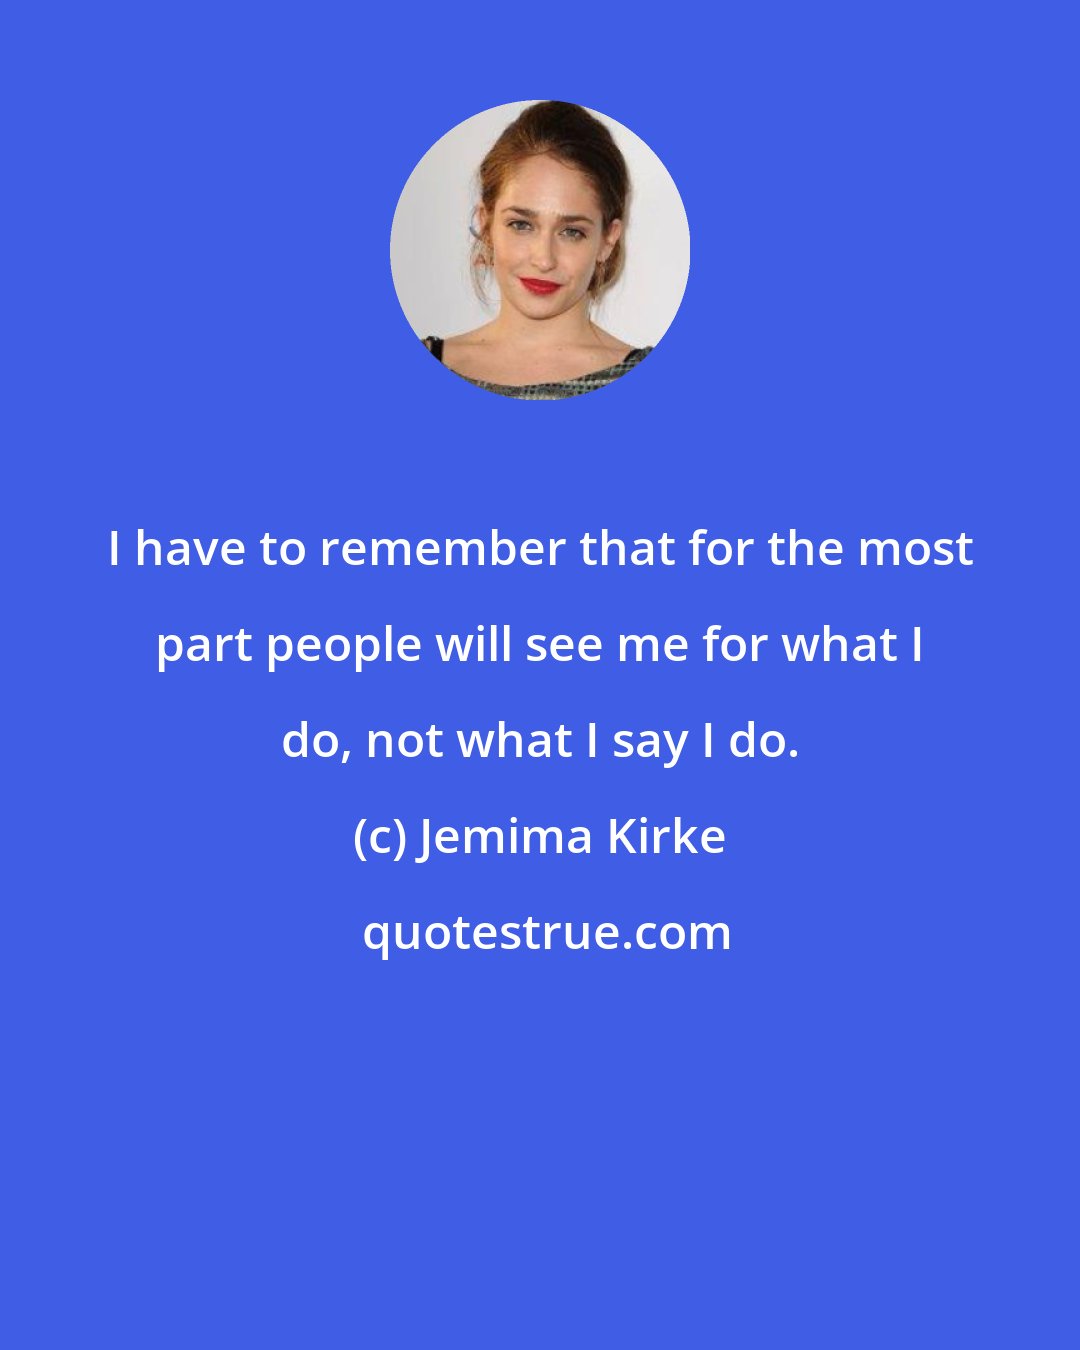 Jemima Kirke: I have to remember that for the most part people will see me for what I do, not what I say I do.